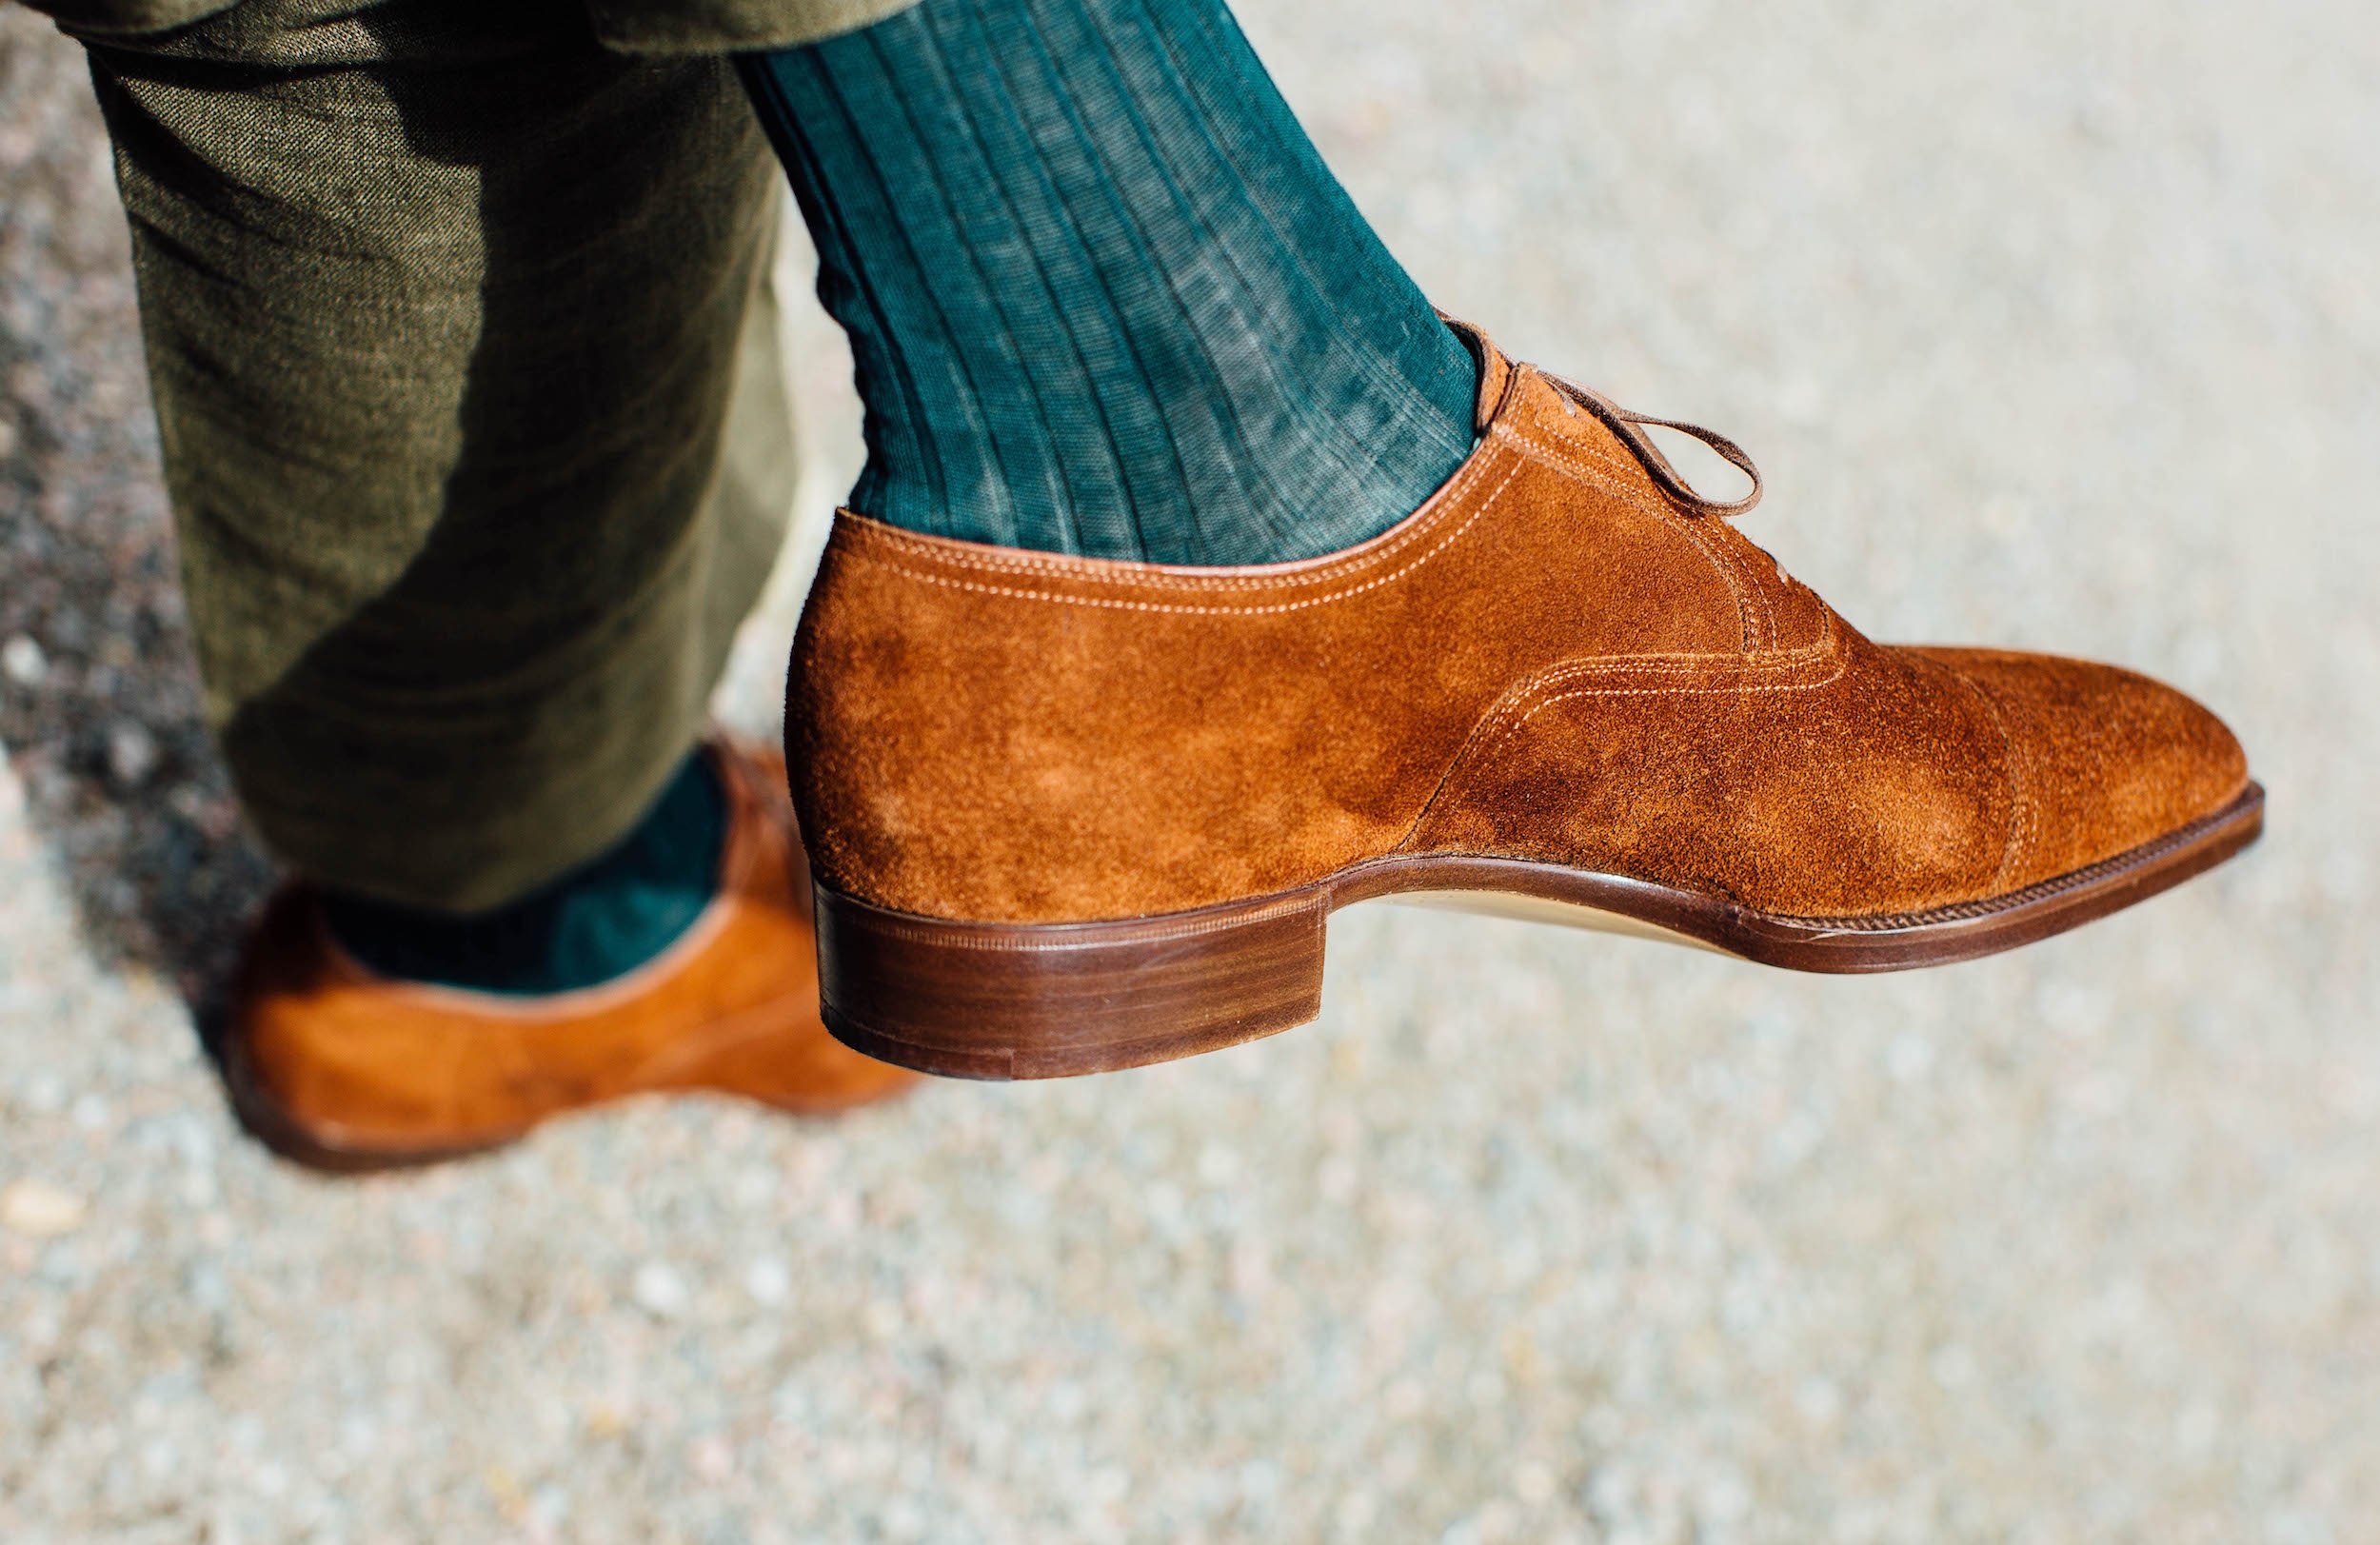 The best fit yet: Stefano Bemer tobacco-suede oxfords – Permanent Style